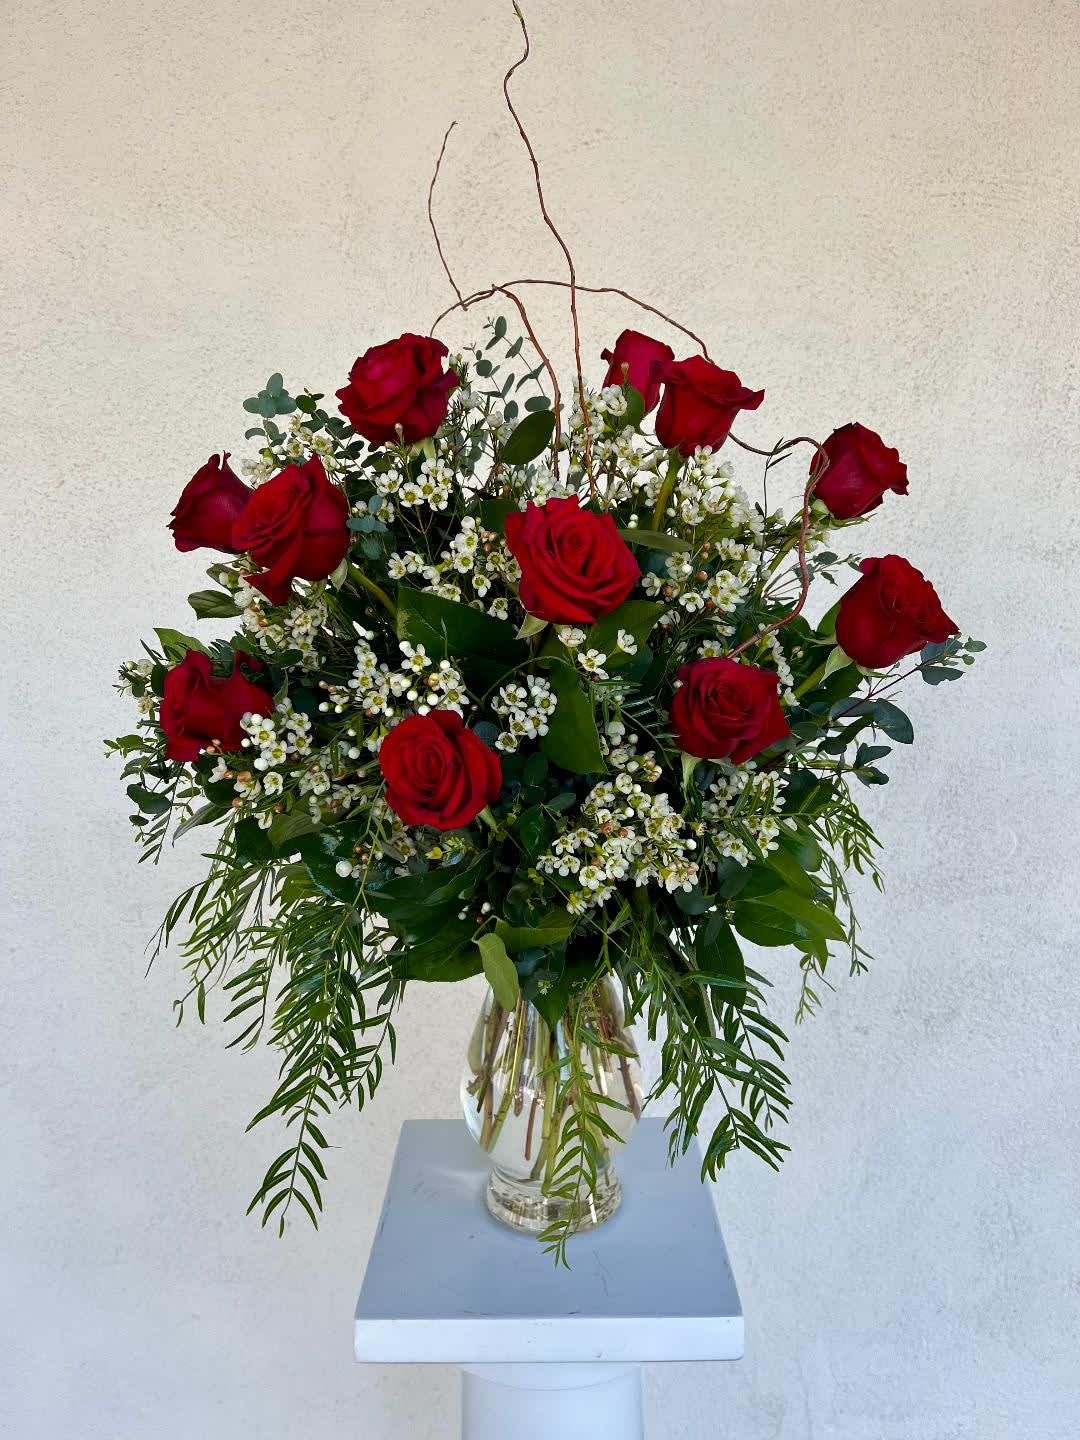 LF23 - 1, 2 or 3 Dozen Red Roses - 12, 24 or 36 Premium Red Roses in a glass vase, with greenery and pretty filler flowers.